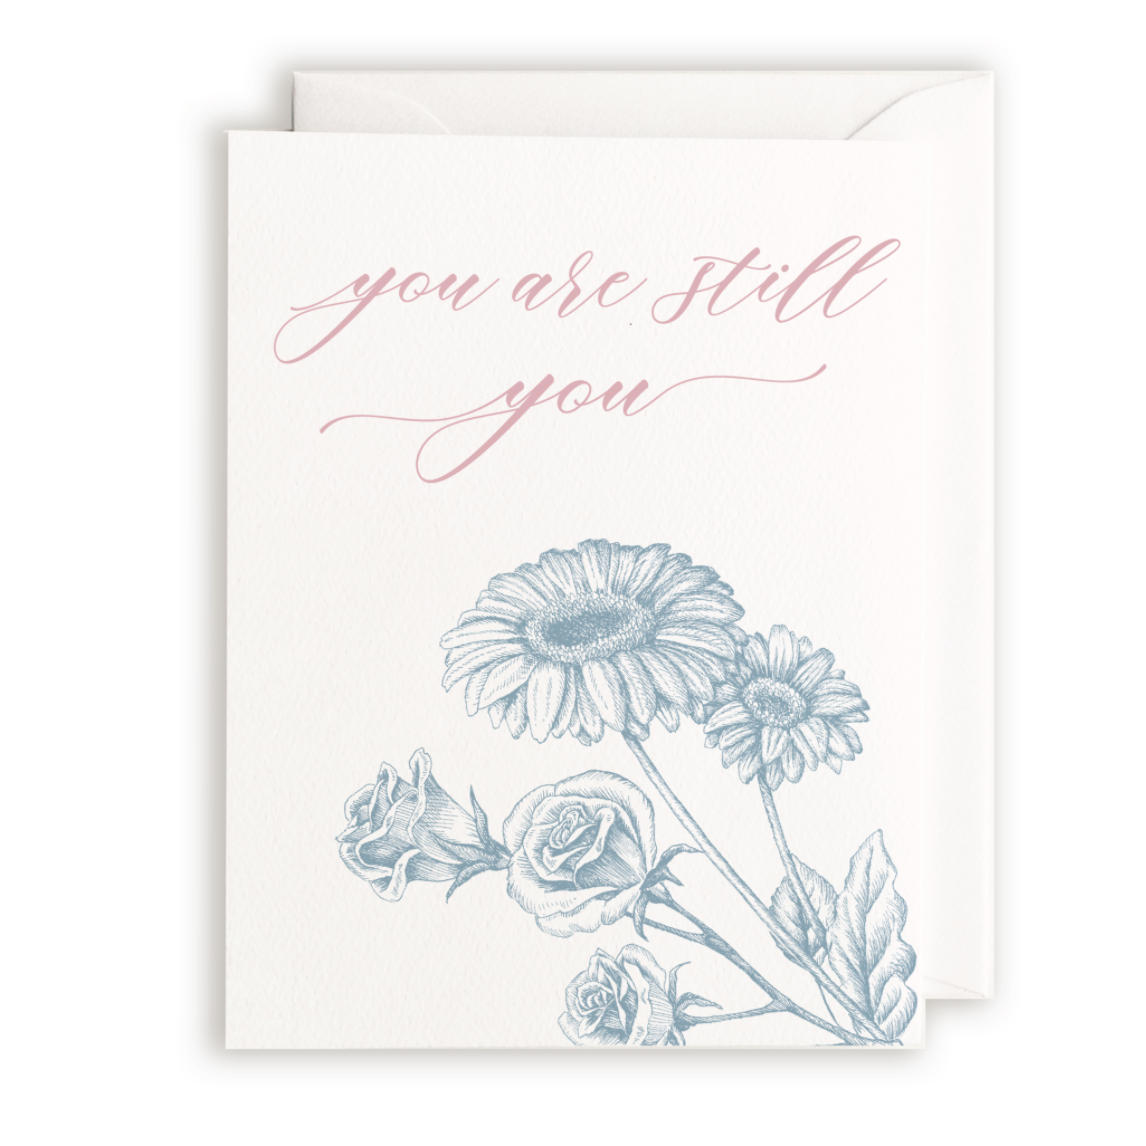 Load image into Gallery viewer, You Are Still You Card by Rust Belt Love
